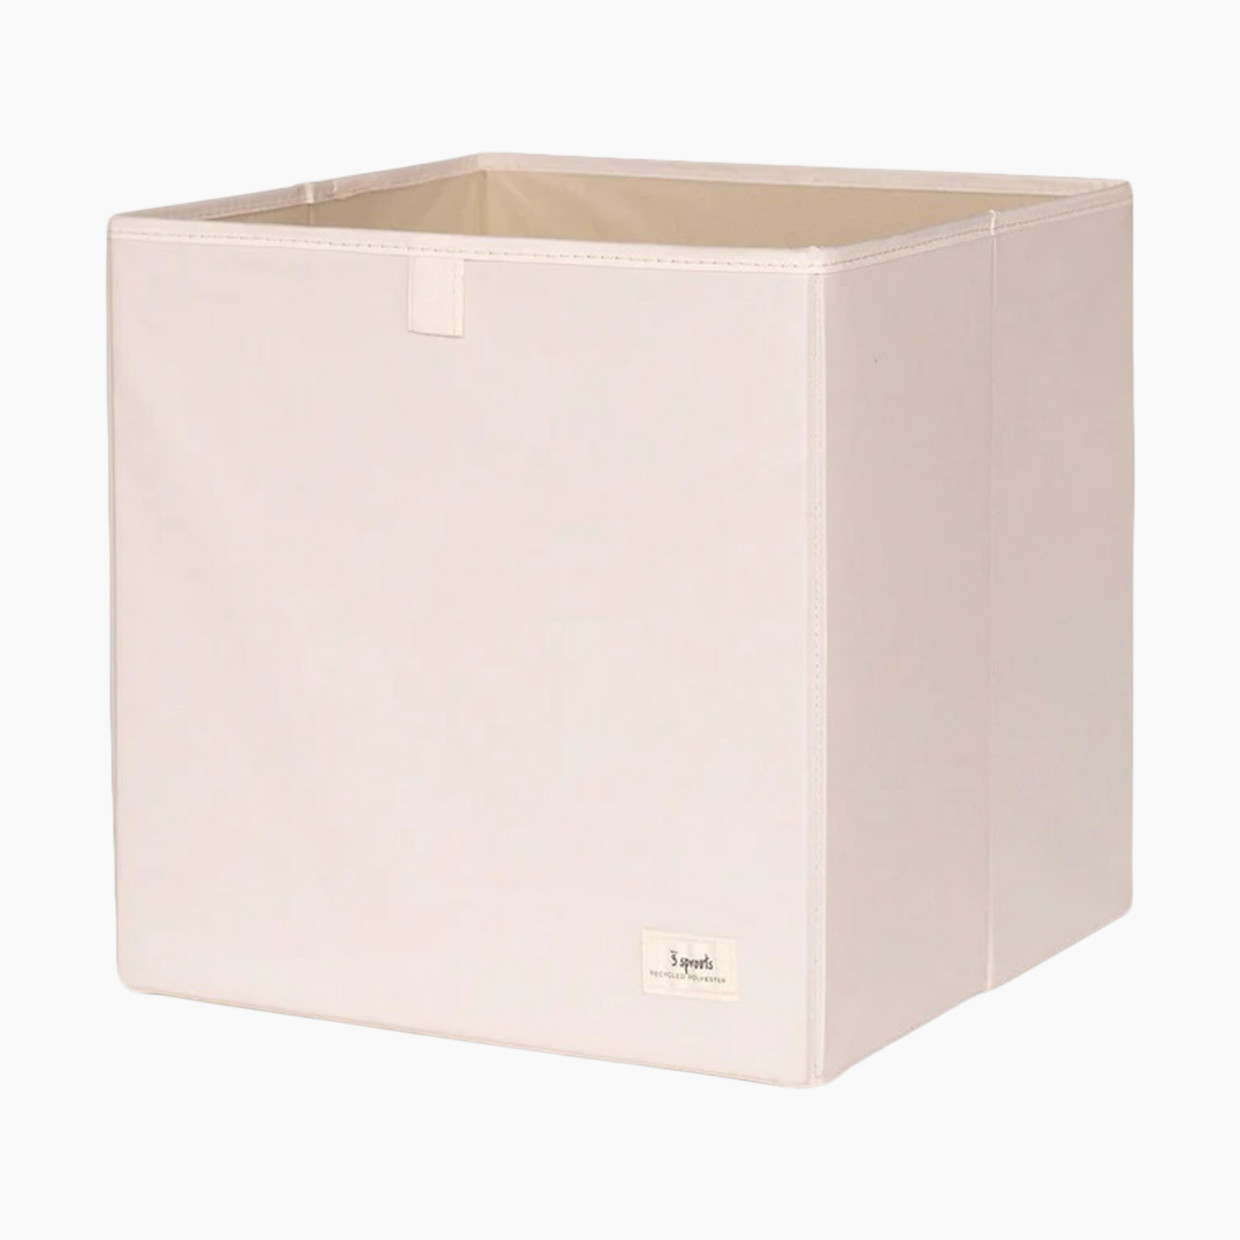 3 Sprouts Recycled Storage Box - Cream.